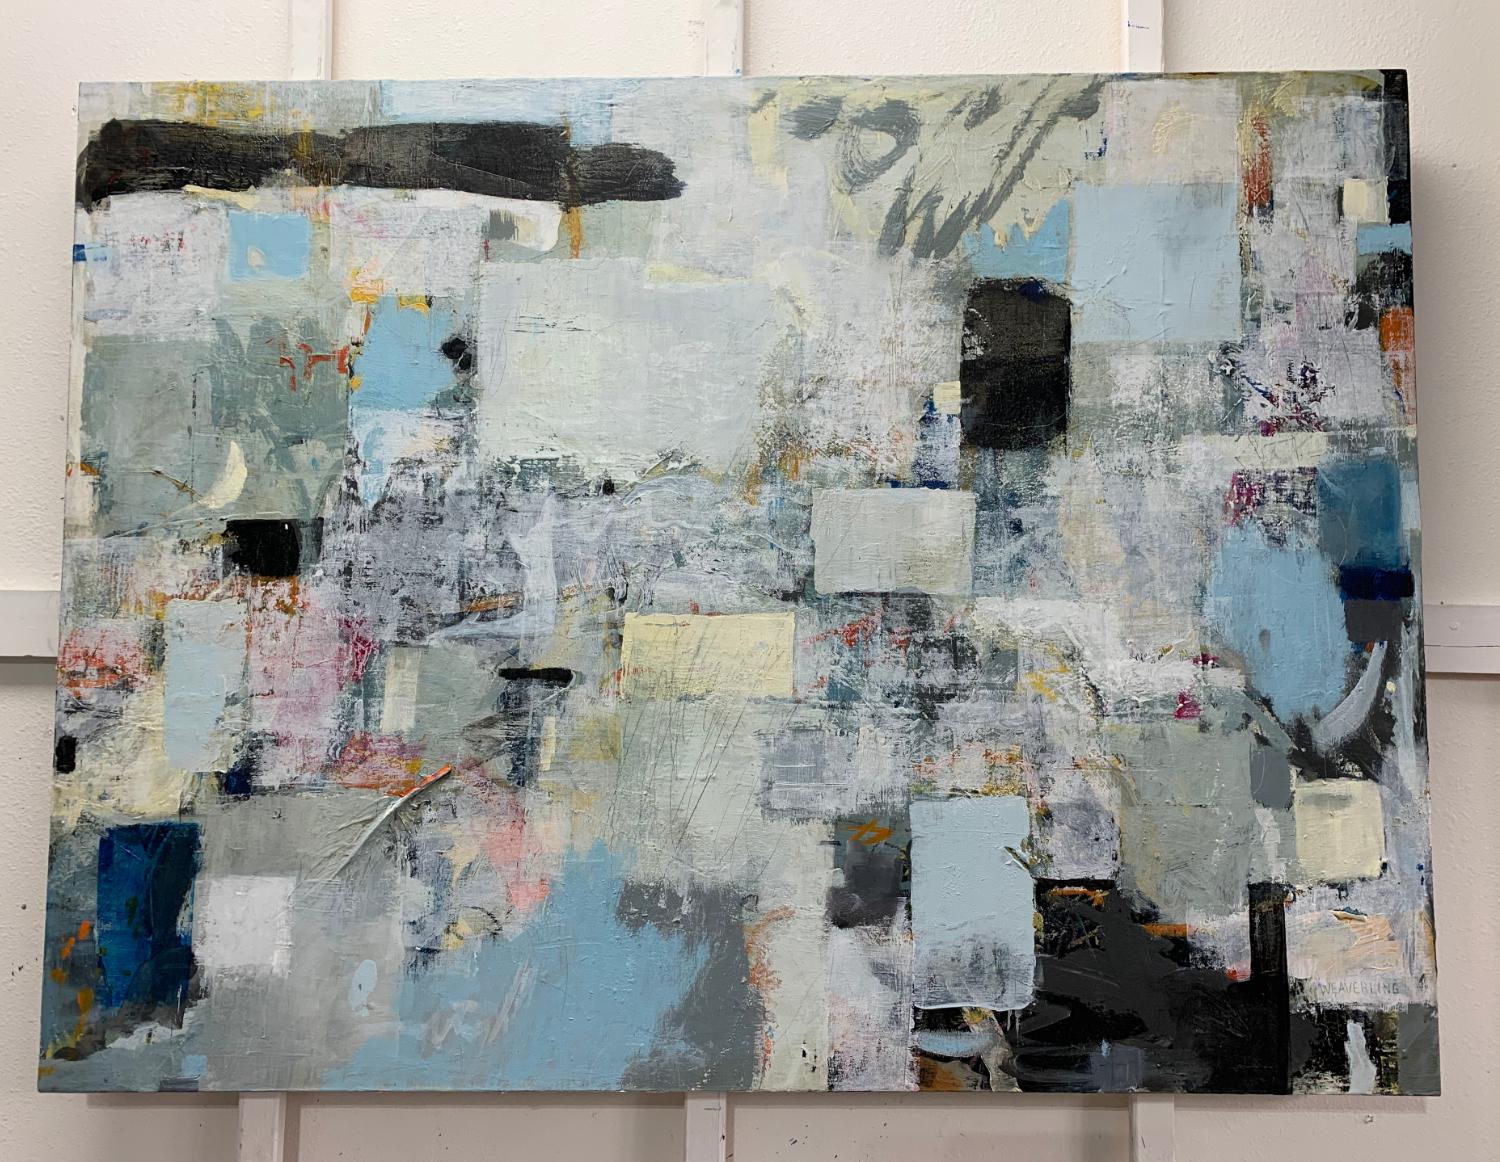 <p>Artist Comments<br>When asked about this rich, densely layered abstraction, artist Julie Weaverling described the work as 